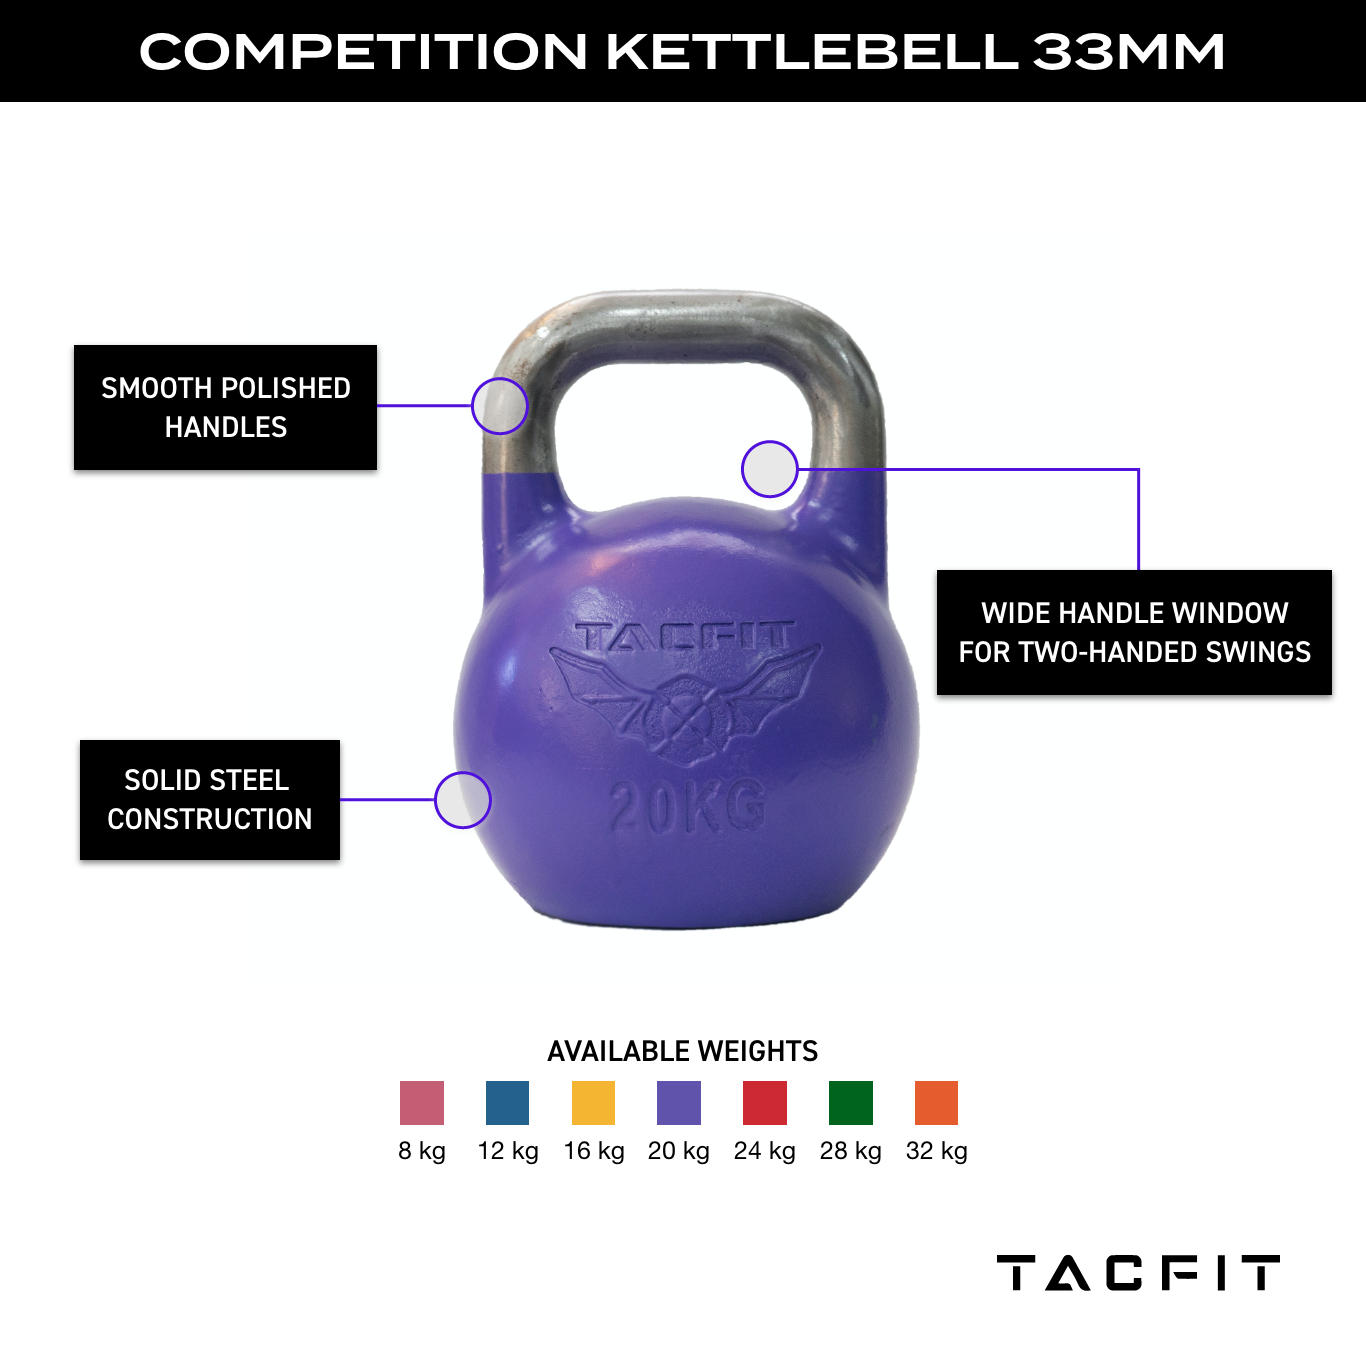 16kg hollow steel competition kettlebell - Fitribution